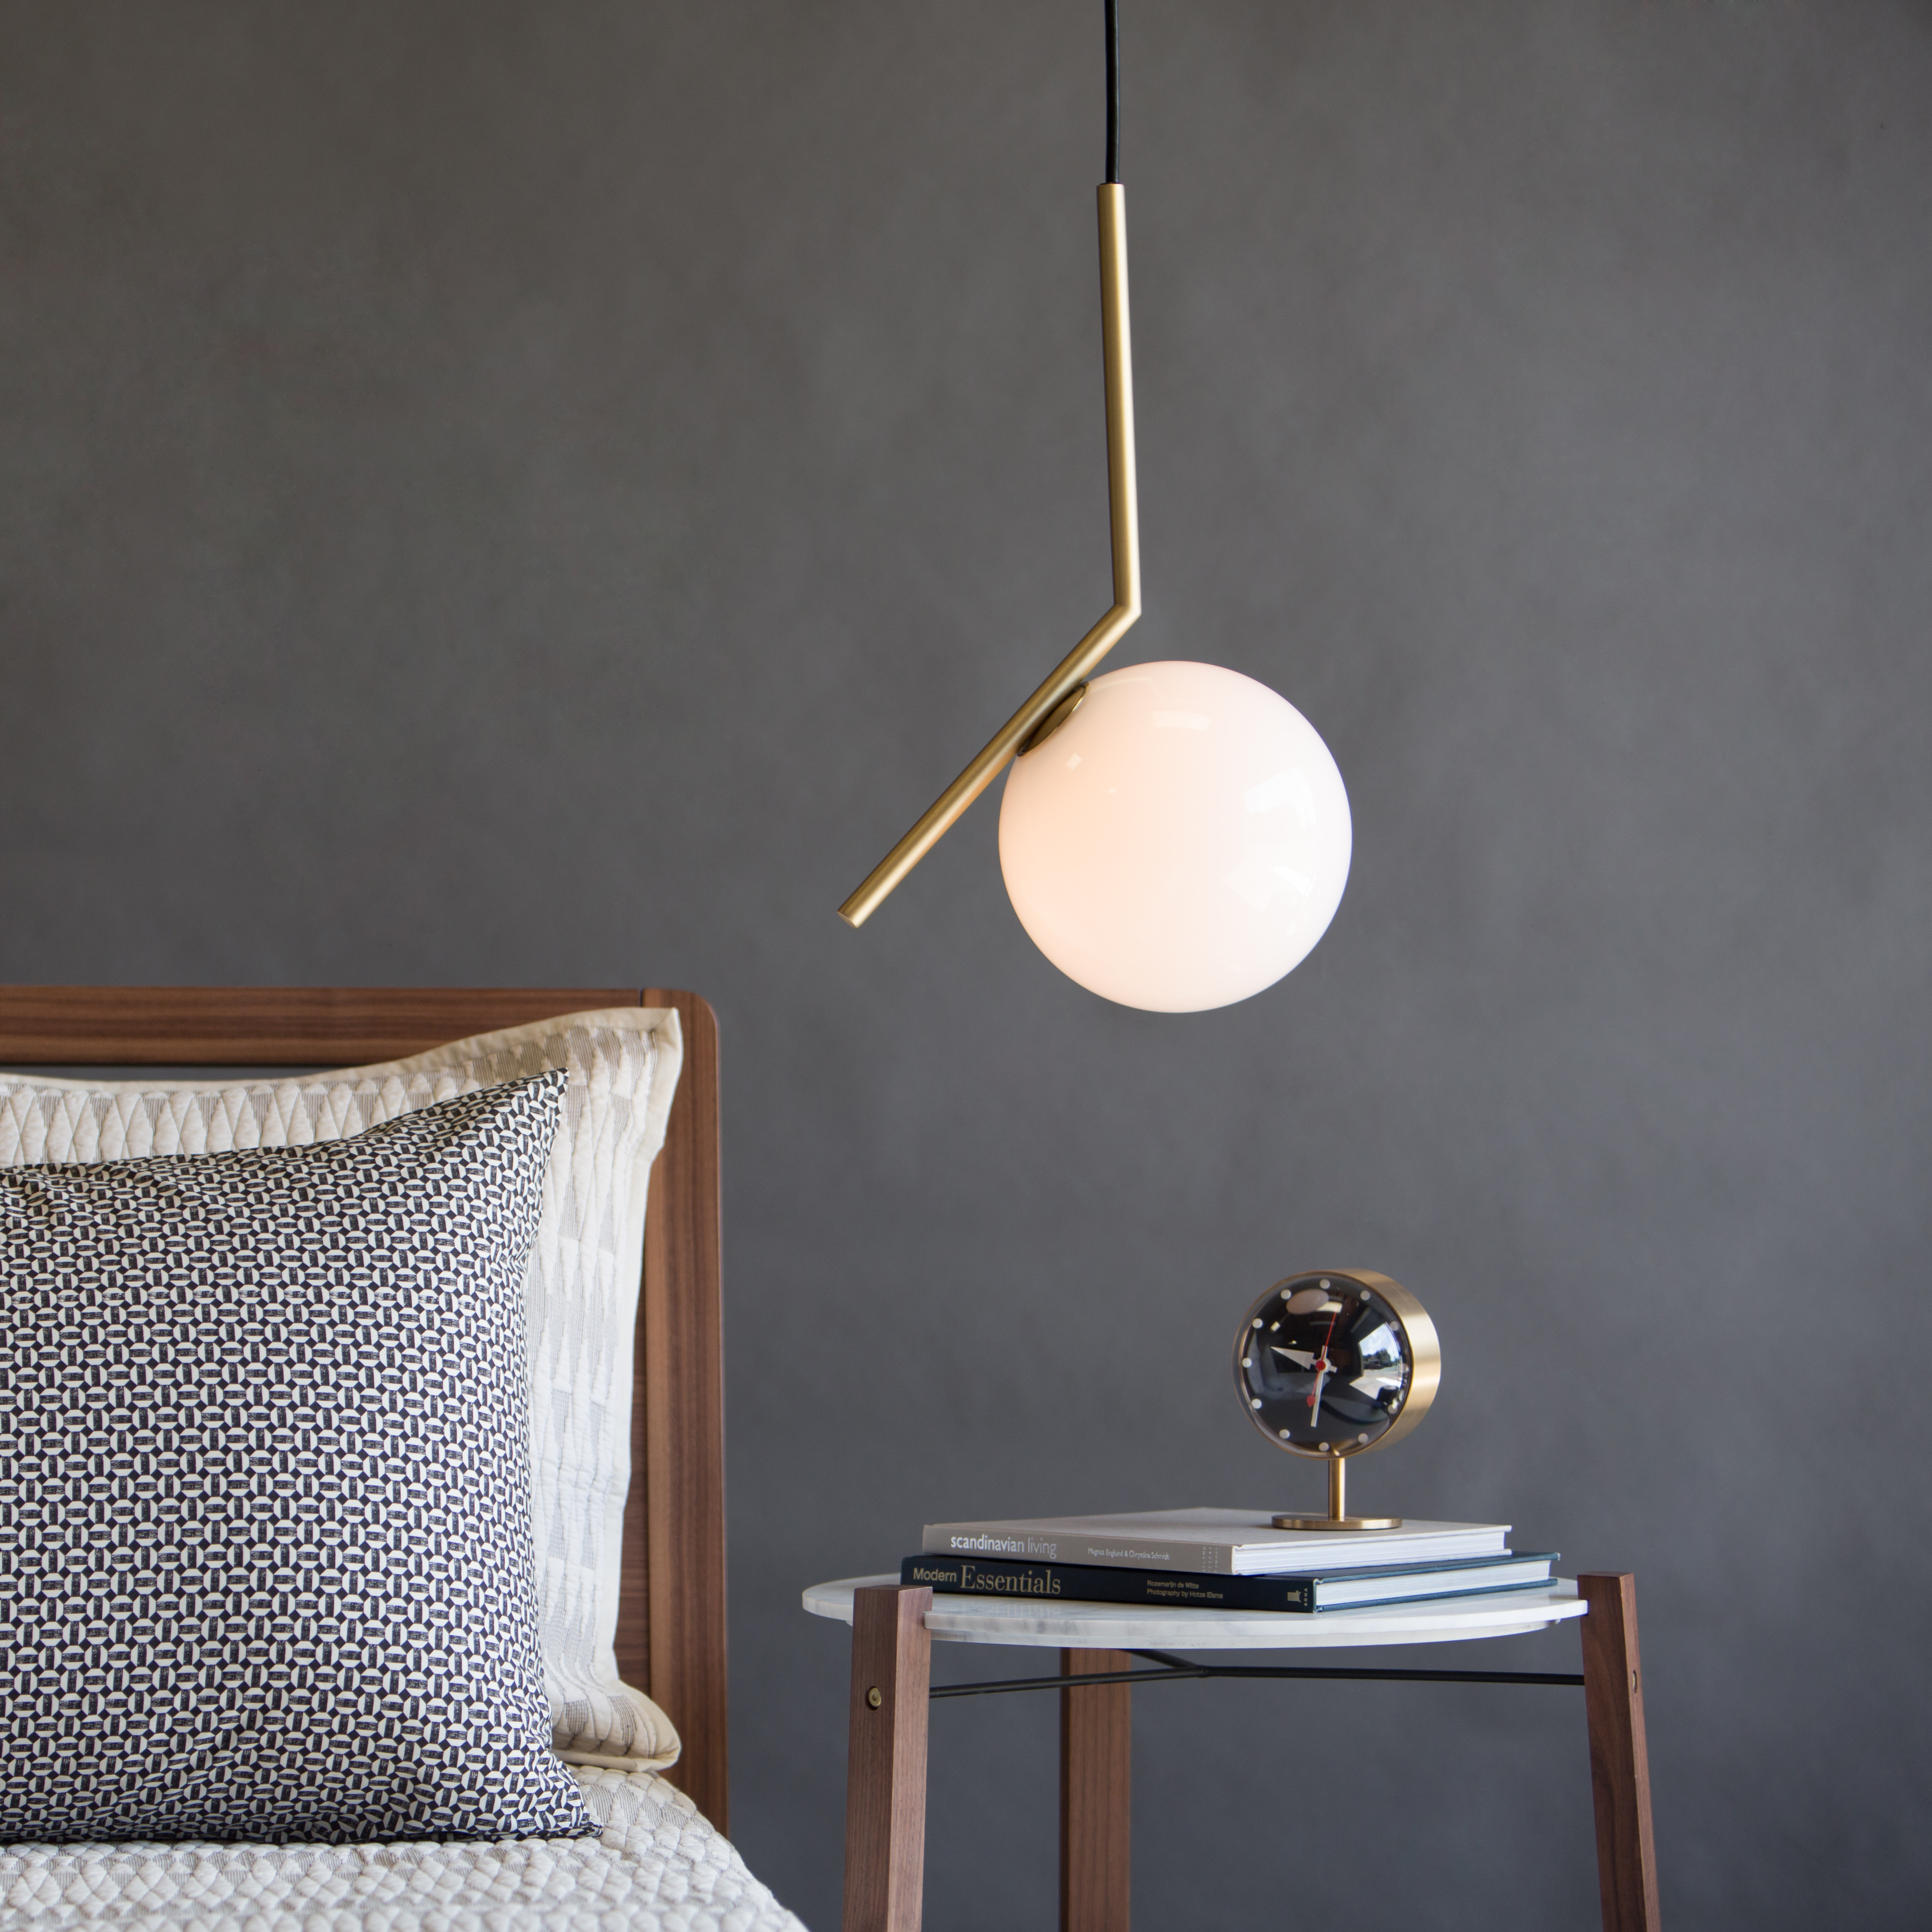 Buy the IC Lights S Pendant, Nelson Night Clock and the Free Range Side Table at Lumens.com today!